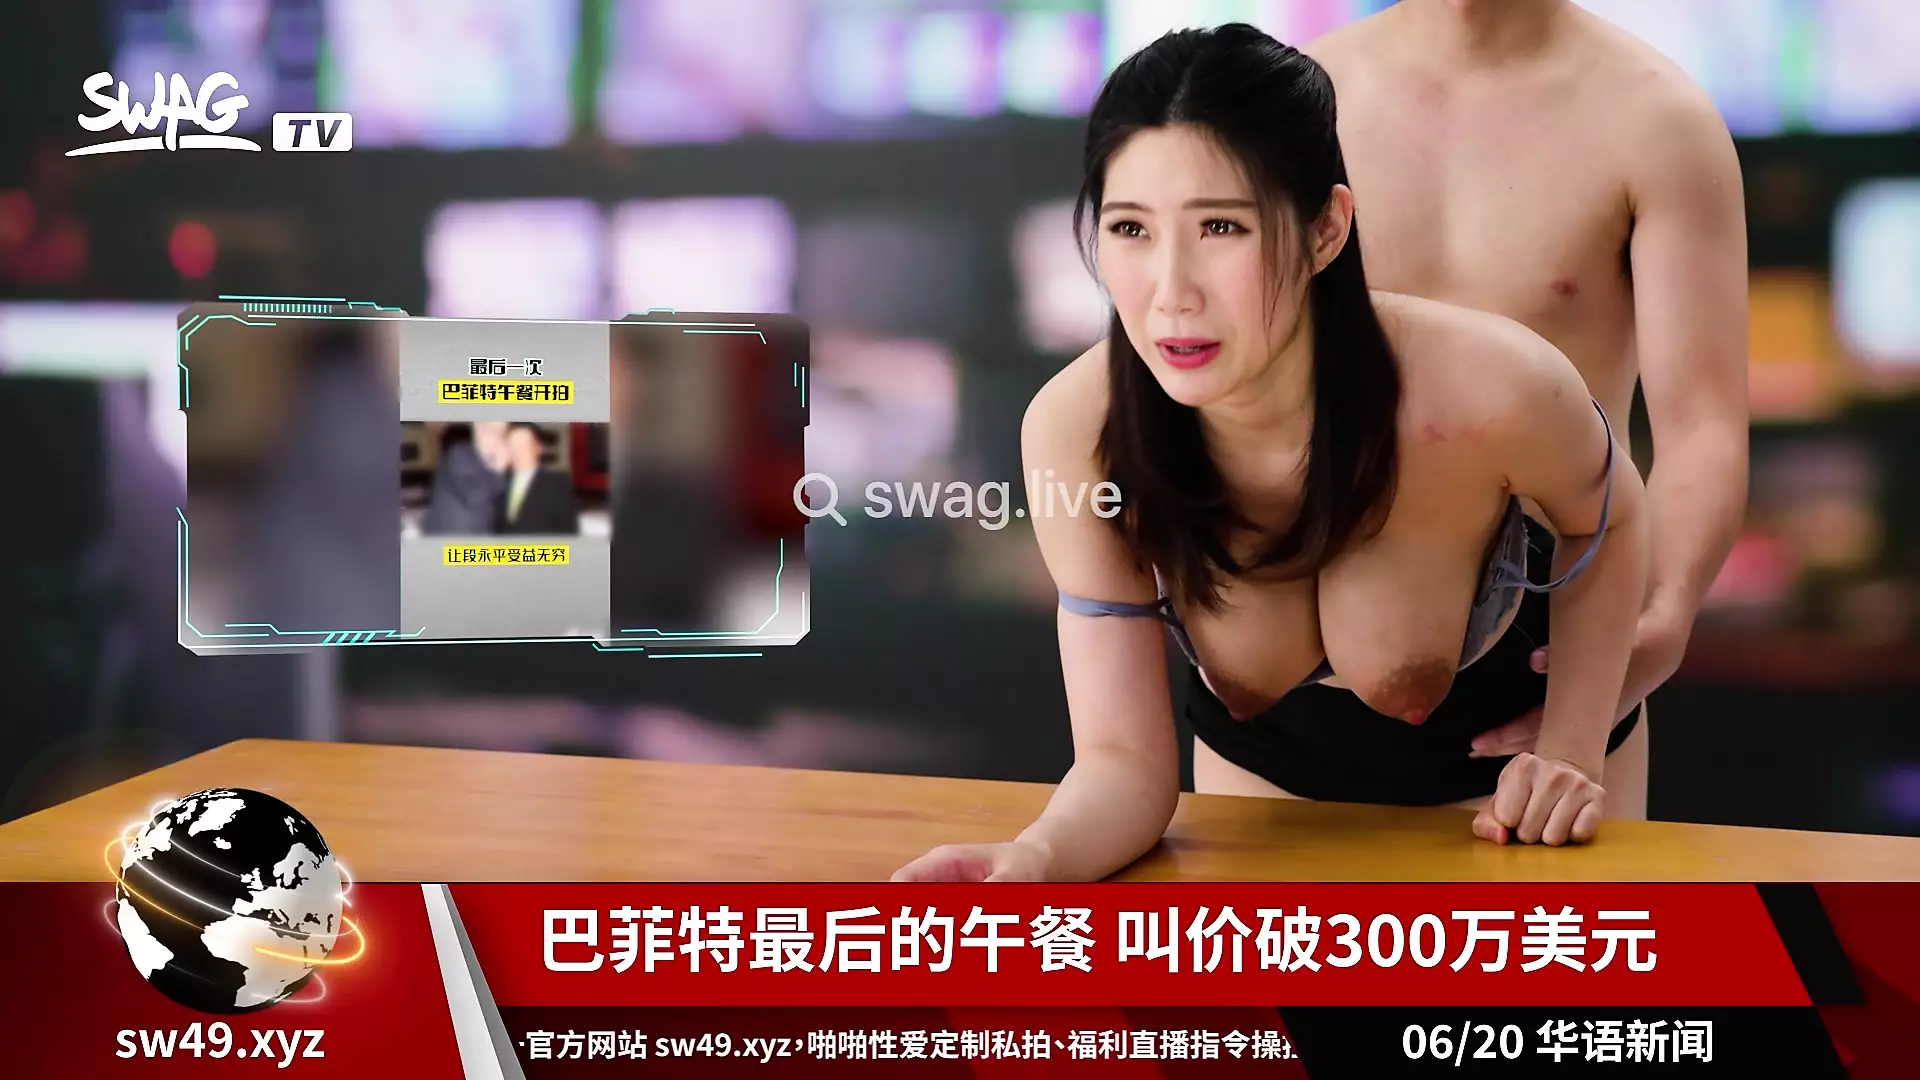 Asian News Reporter - News Anchor got Fucked While Broadcasting Swag Live Swic-0003 | xHamster